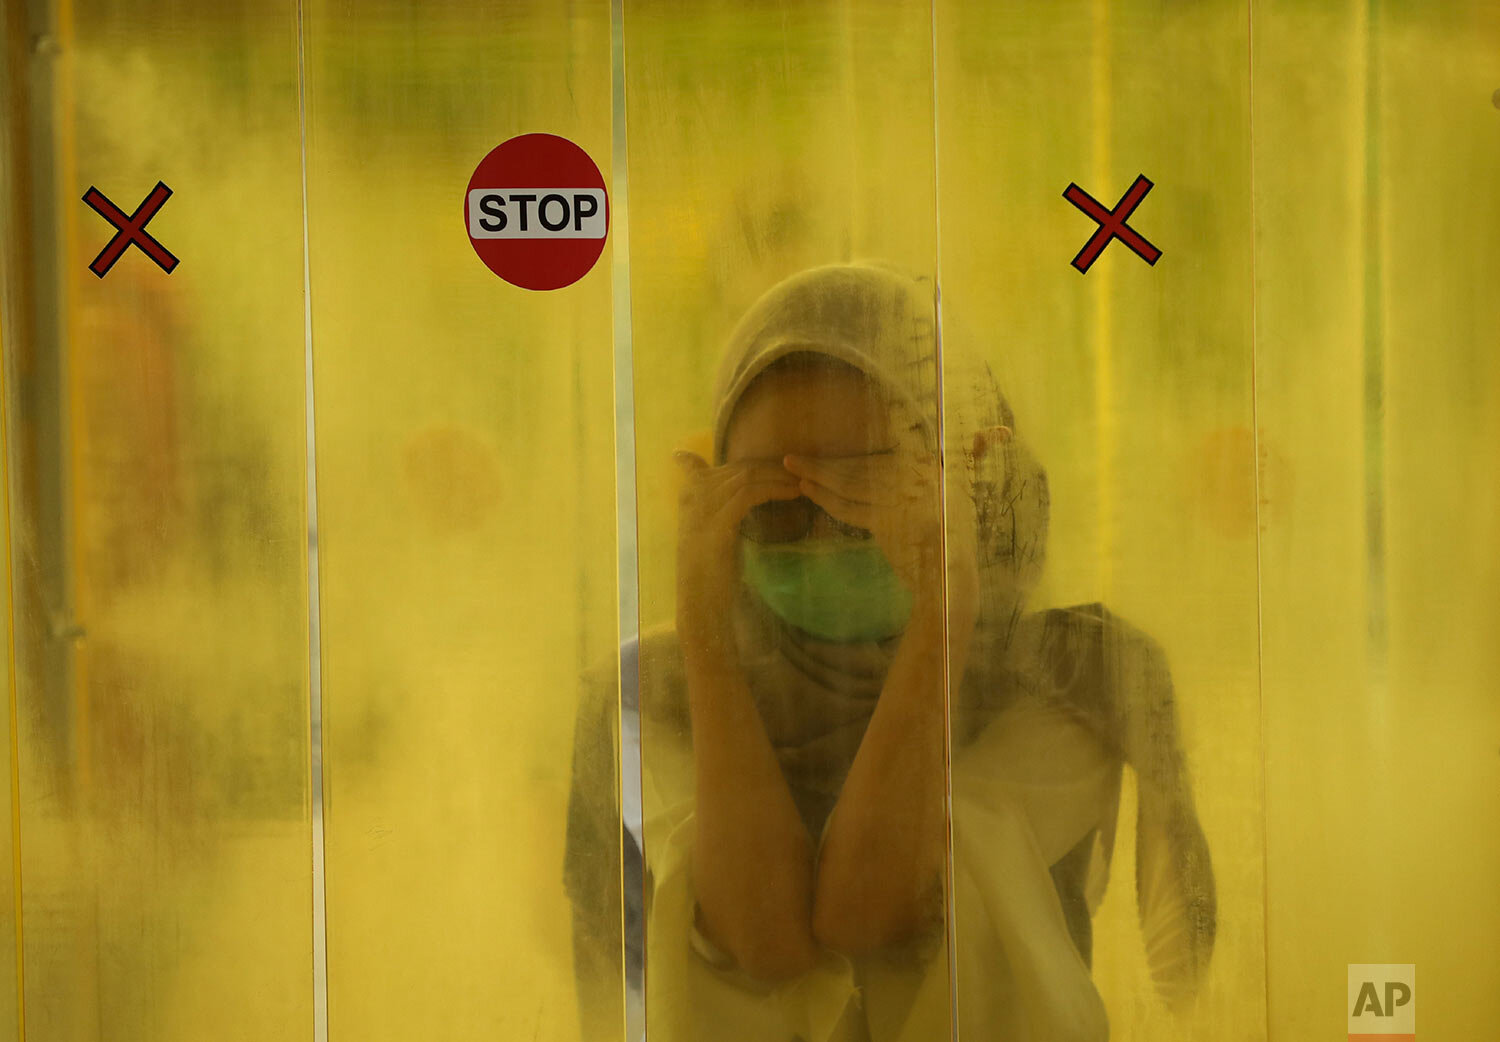  A woman reacts as she is sprayed with disinfectant inside a chamber as a precaution against the new coronavirus outbreak before entering a shopping mall in Jakarta, Indonesia, Tuesday, June 9, 2020.  (AP Photo/Dita Alangkara) 